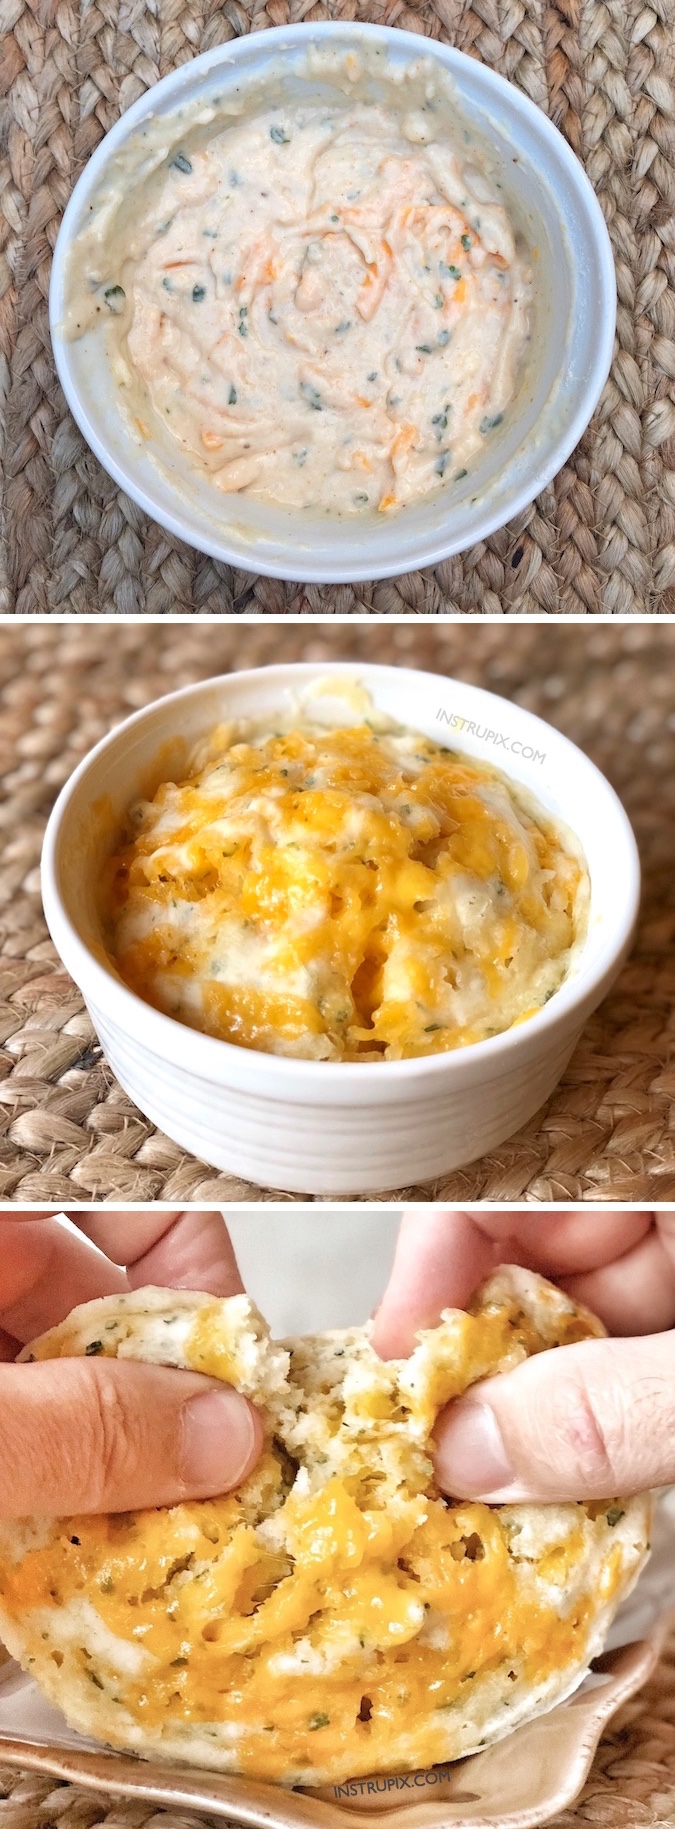 Red Lobster Cheddar Bay Biscuit In A Mug Recipe -- Easy! Just 2 minutes in the microwave! Perfect as a side for dinner if you are only cooking for one. The easiest comfort food you will ever make! Instrupix.com